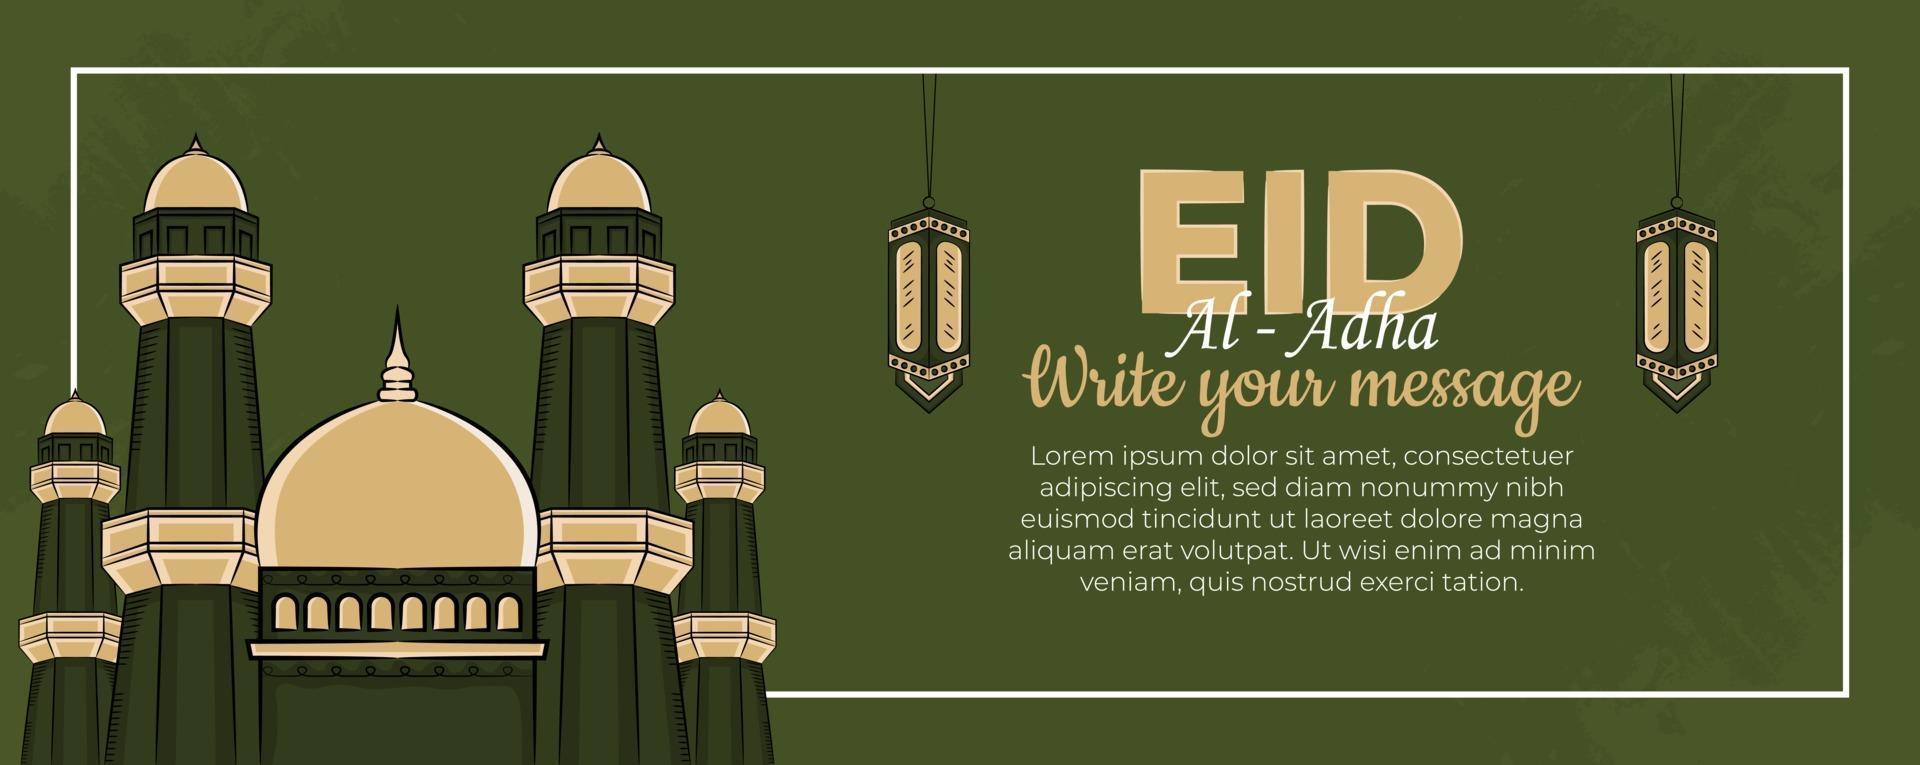 Eid al-adha banner template with Hand drawn Muslim People, Mosque, Lantern and islamic ornament in Green Background. vector